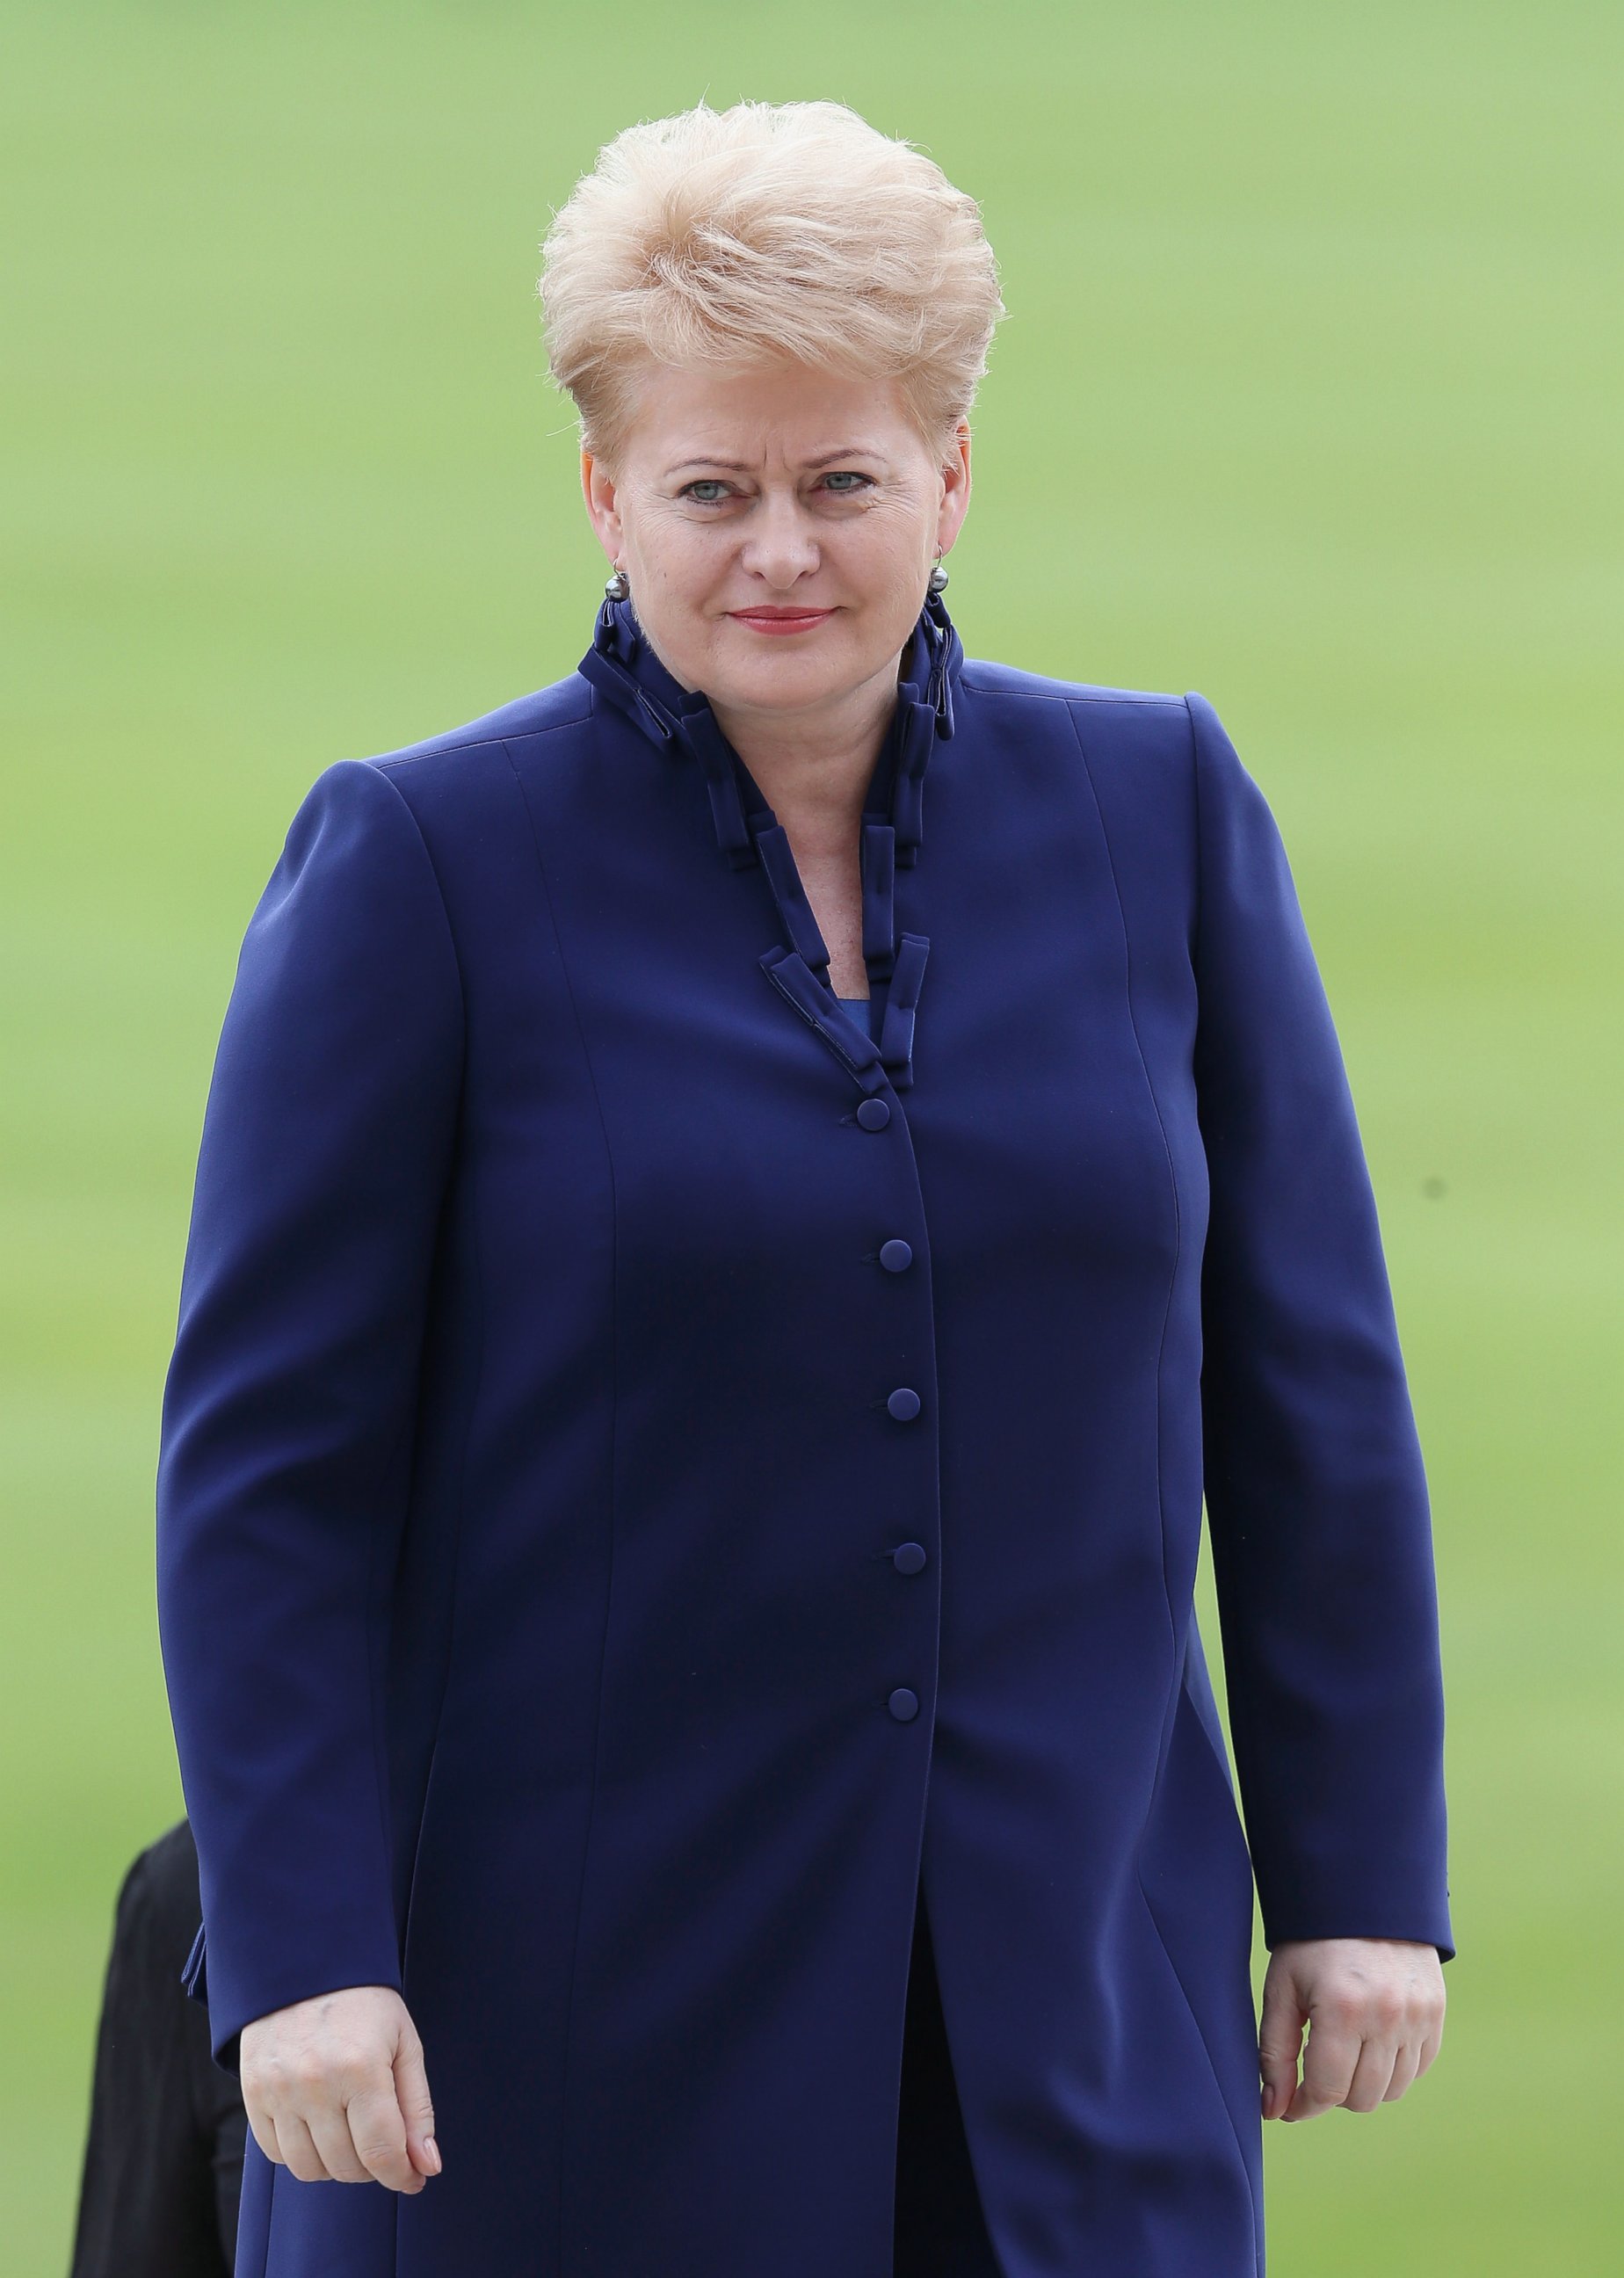 PHOTO: Dalia Grybauskaite, President of Lithuania, arrives for a reception at Buckingham Palace for Heads of State and Government attending the Olympics Opening Ceremony, July 27, 2012, in London.